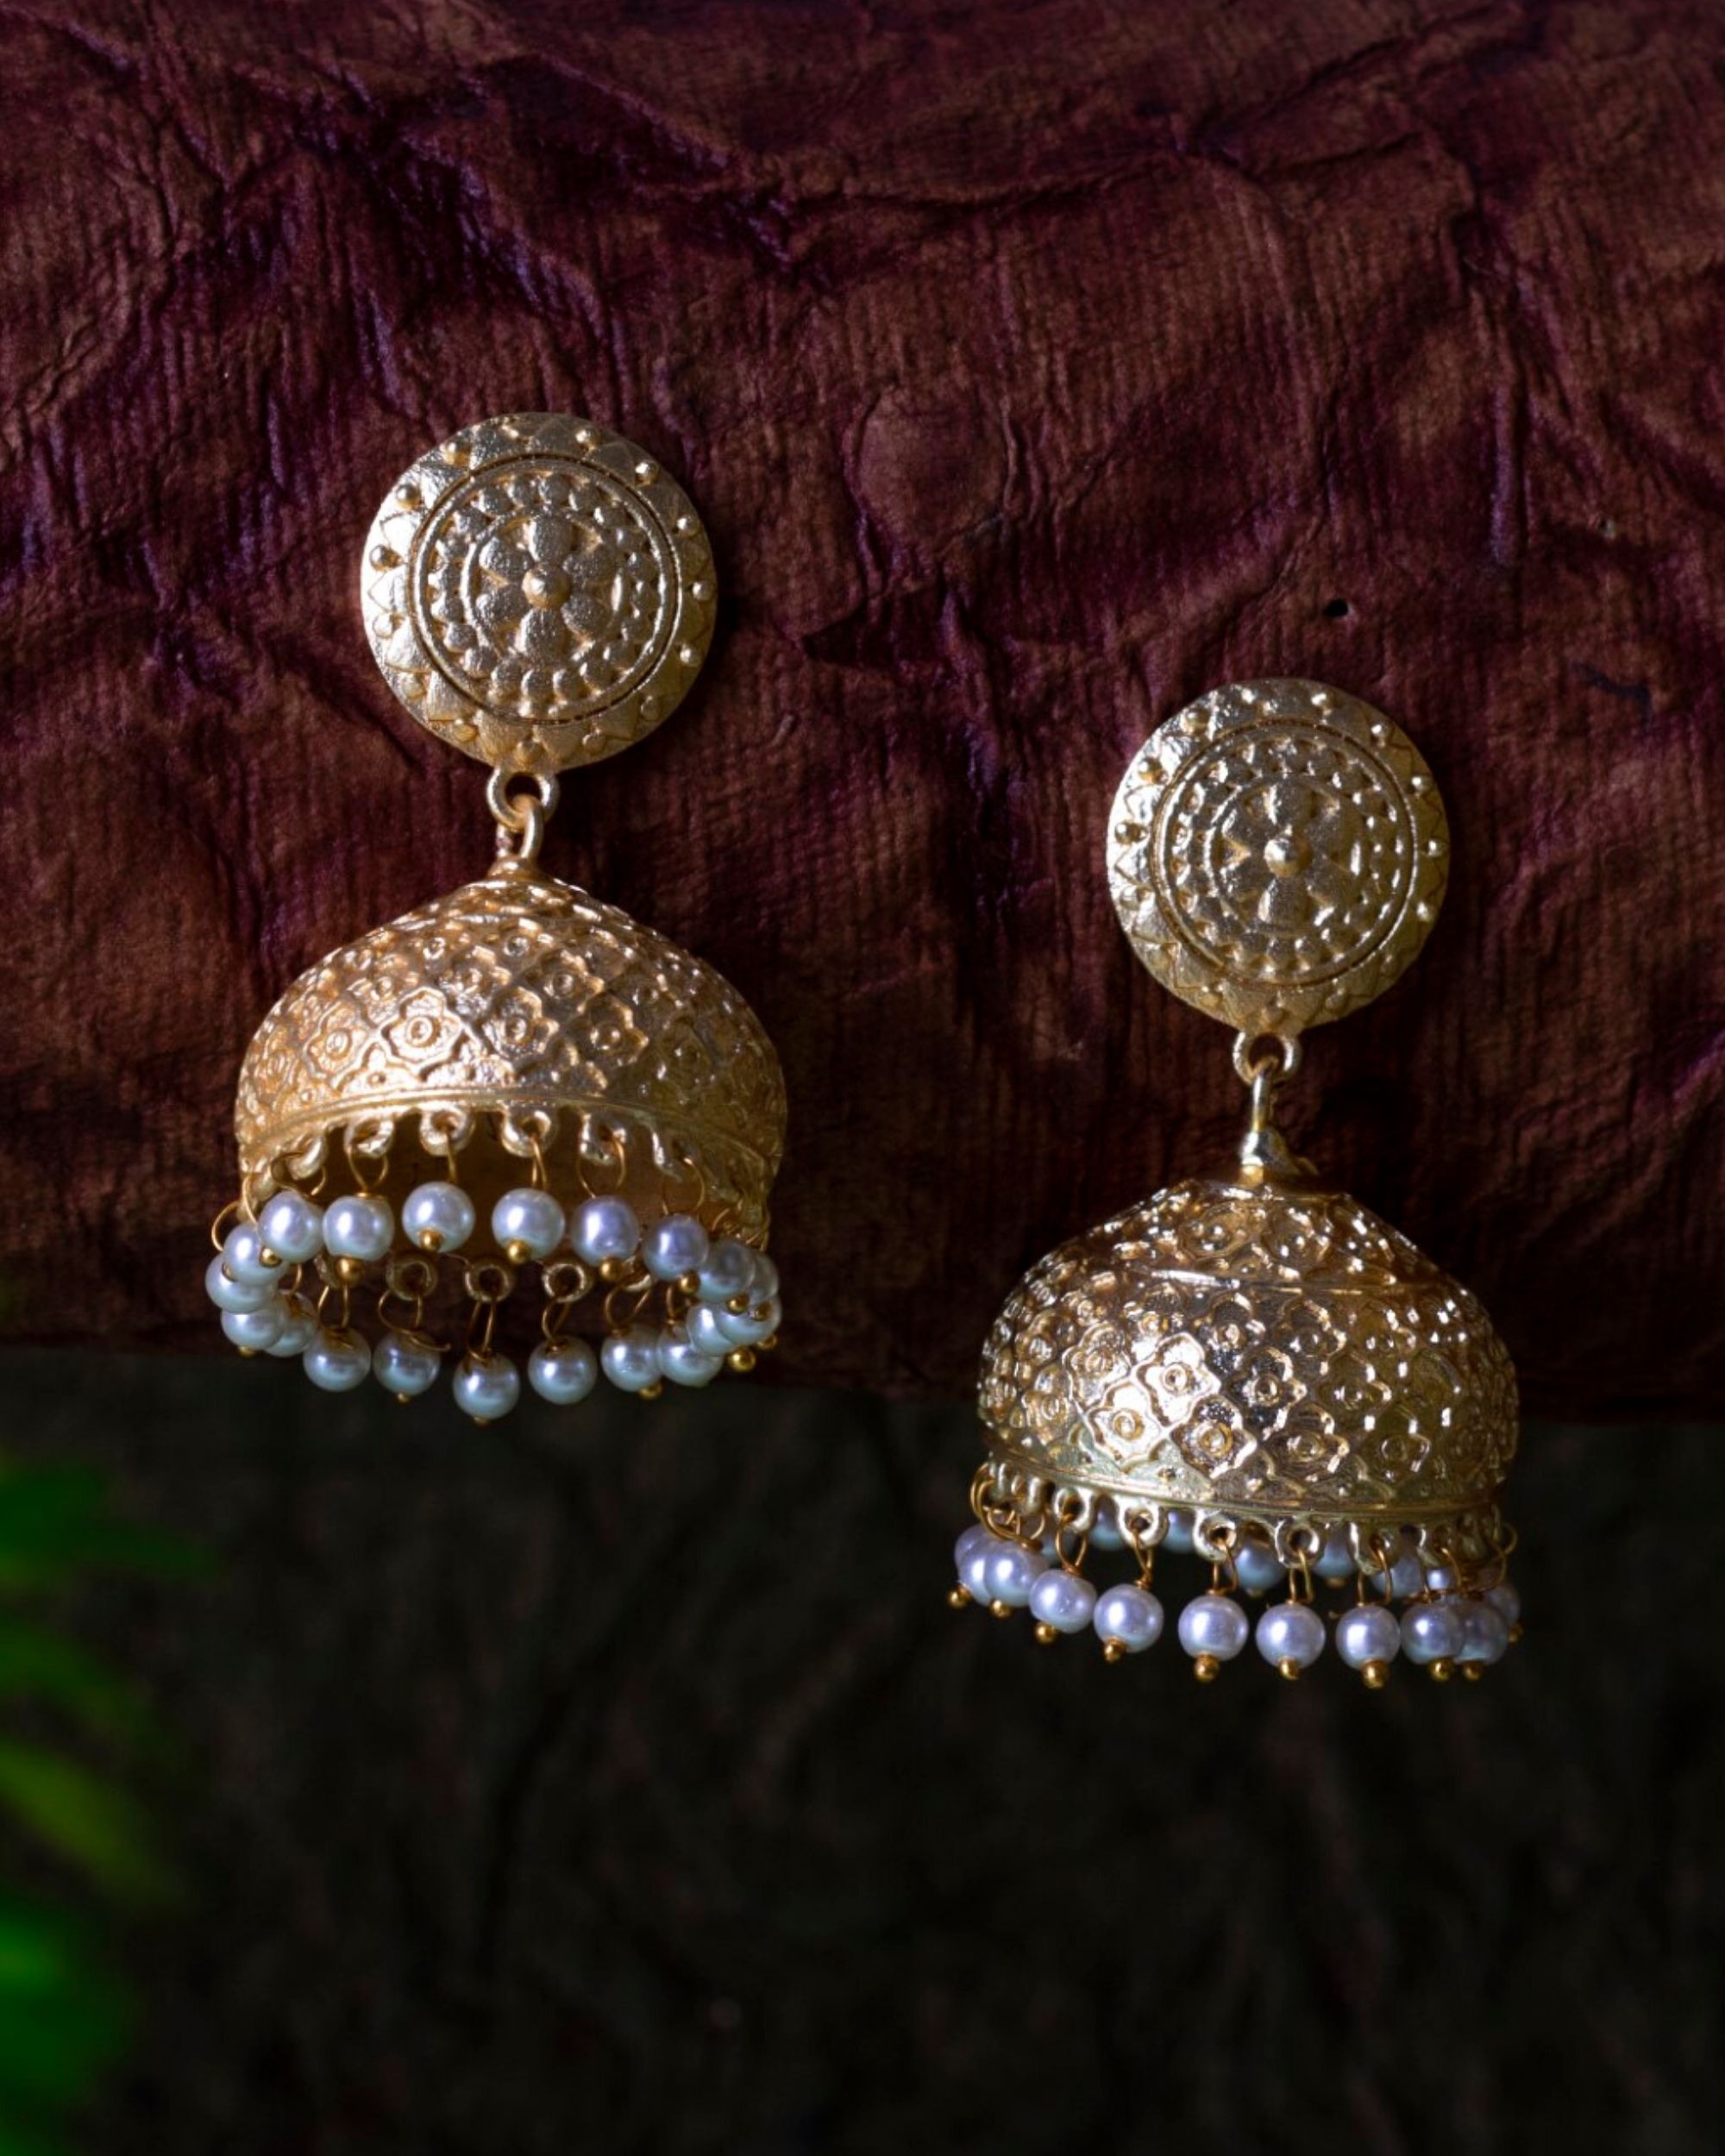 Floral motif jhumka with pearl beads by Studio B 40 | The Secret Label